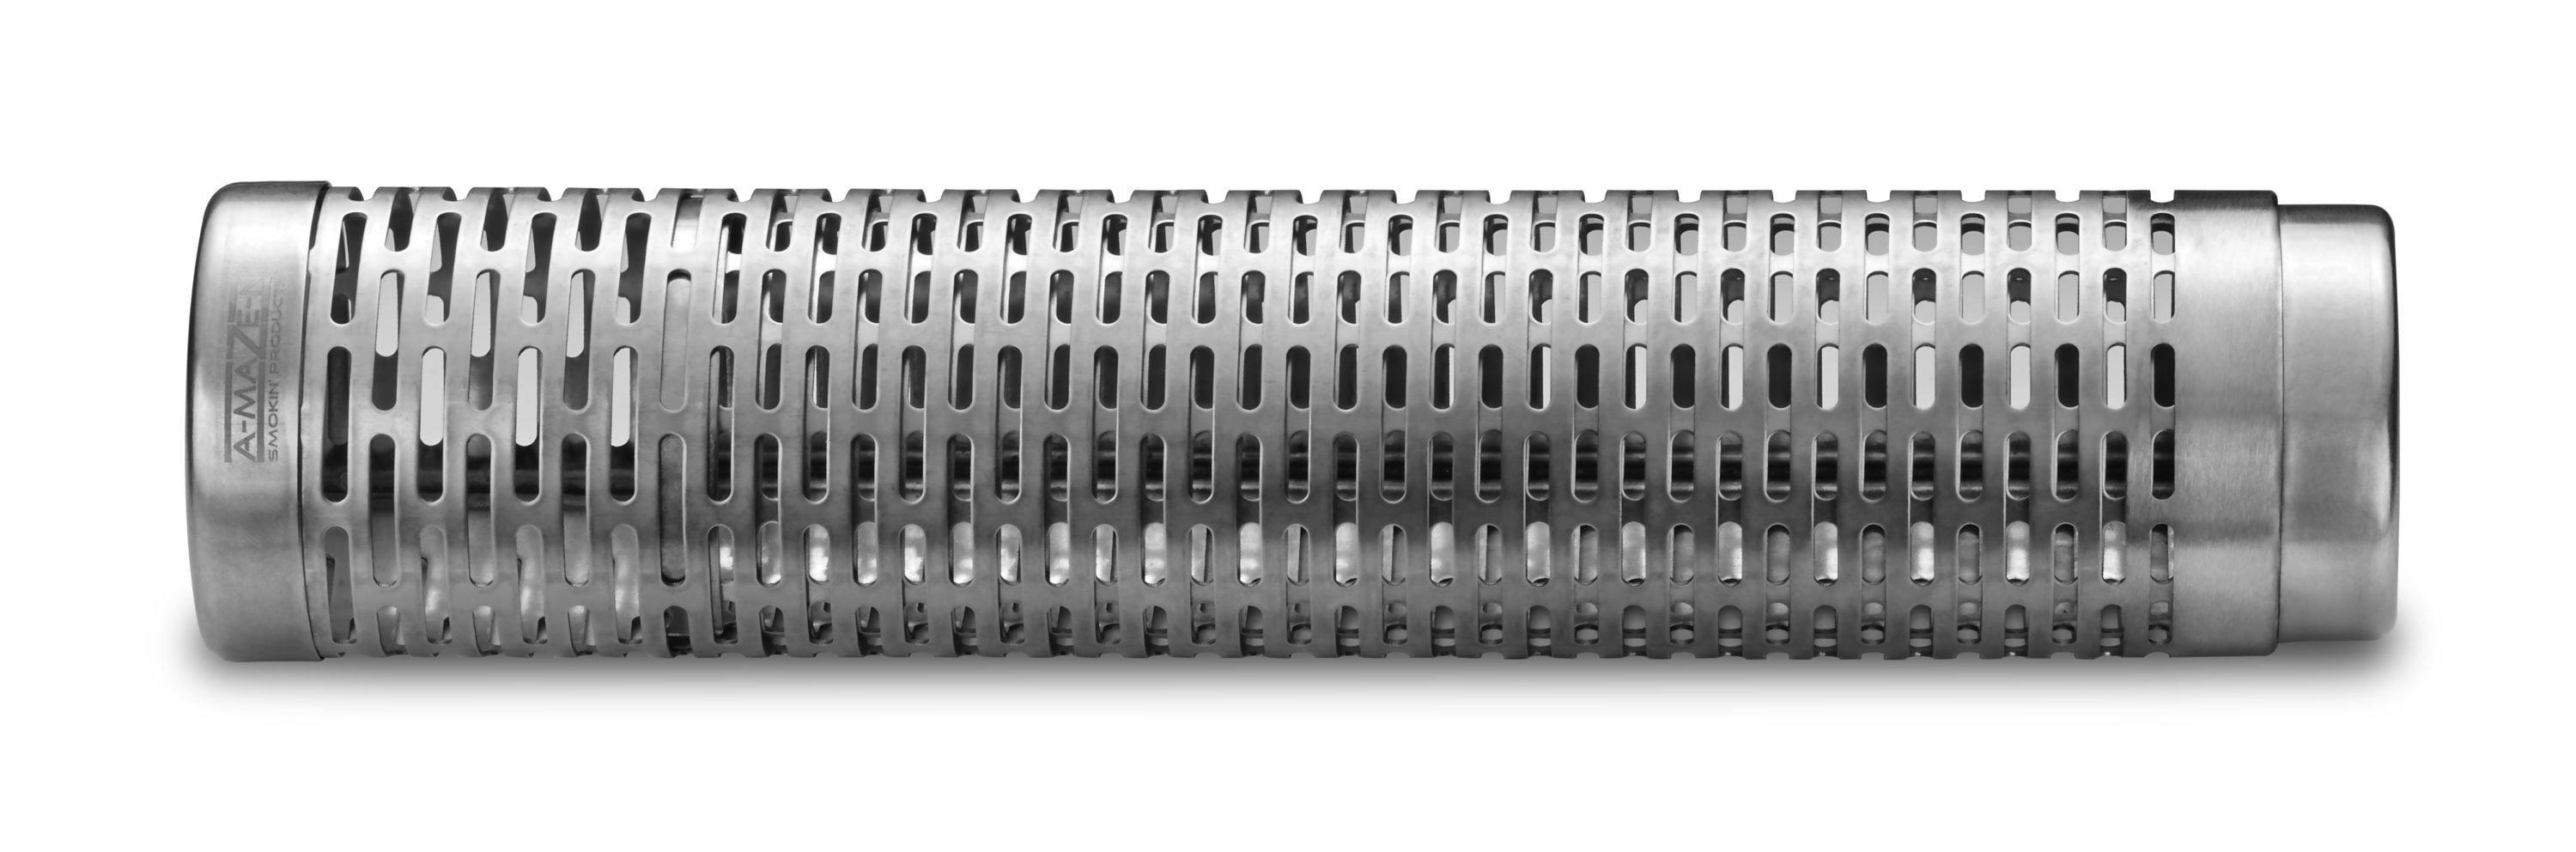 Steel Heat Shield for Perfect Flame Lowes Model & Life@Home KEXMY Suntech Parts & Services Stainless Steel Heat Plate 